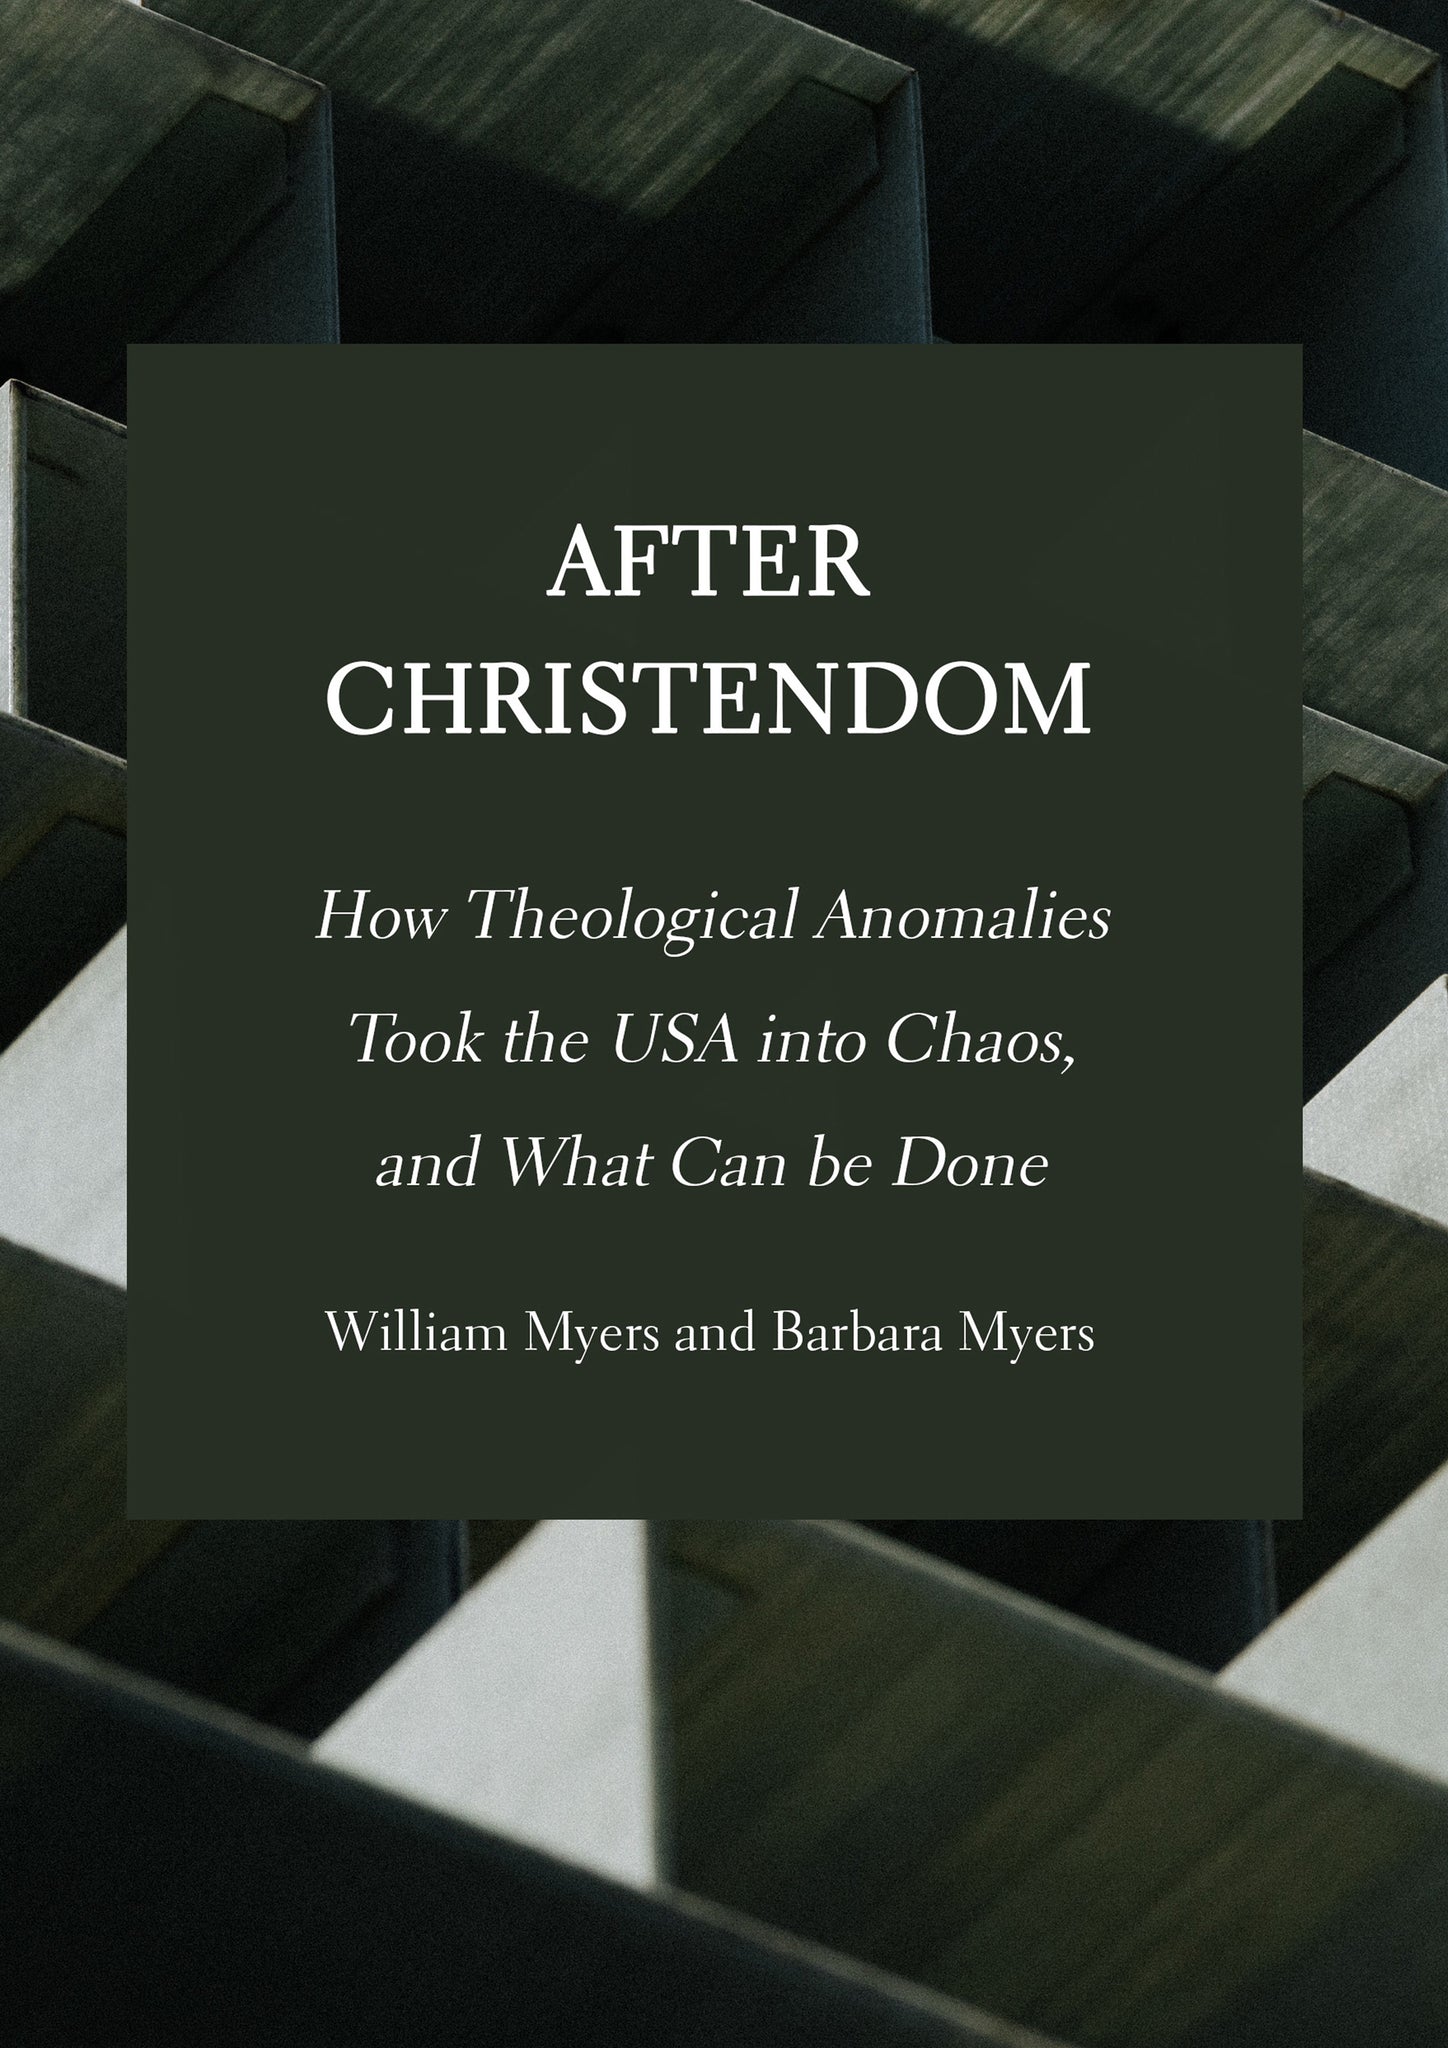 After Christendom: How Theological Anomalies Took the USA into Chaos, and What Can be Done